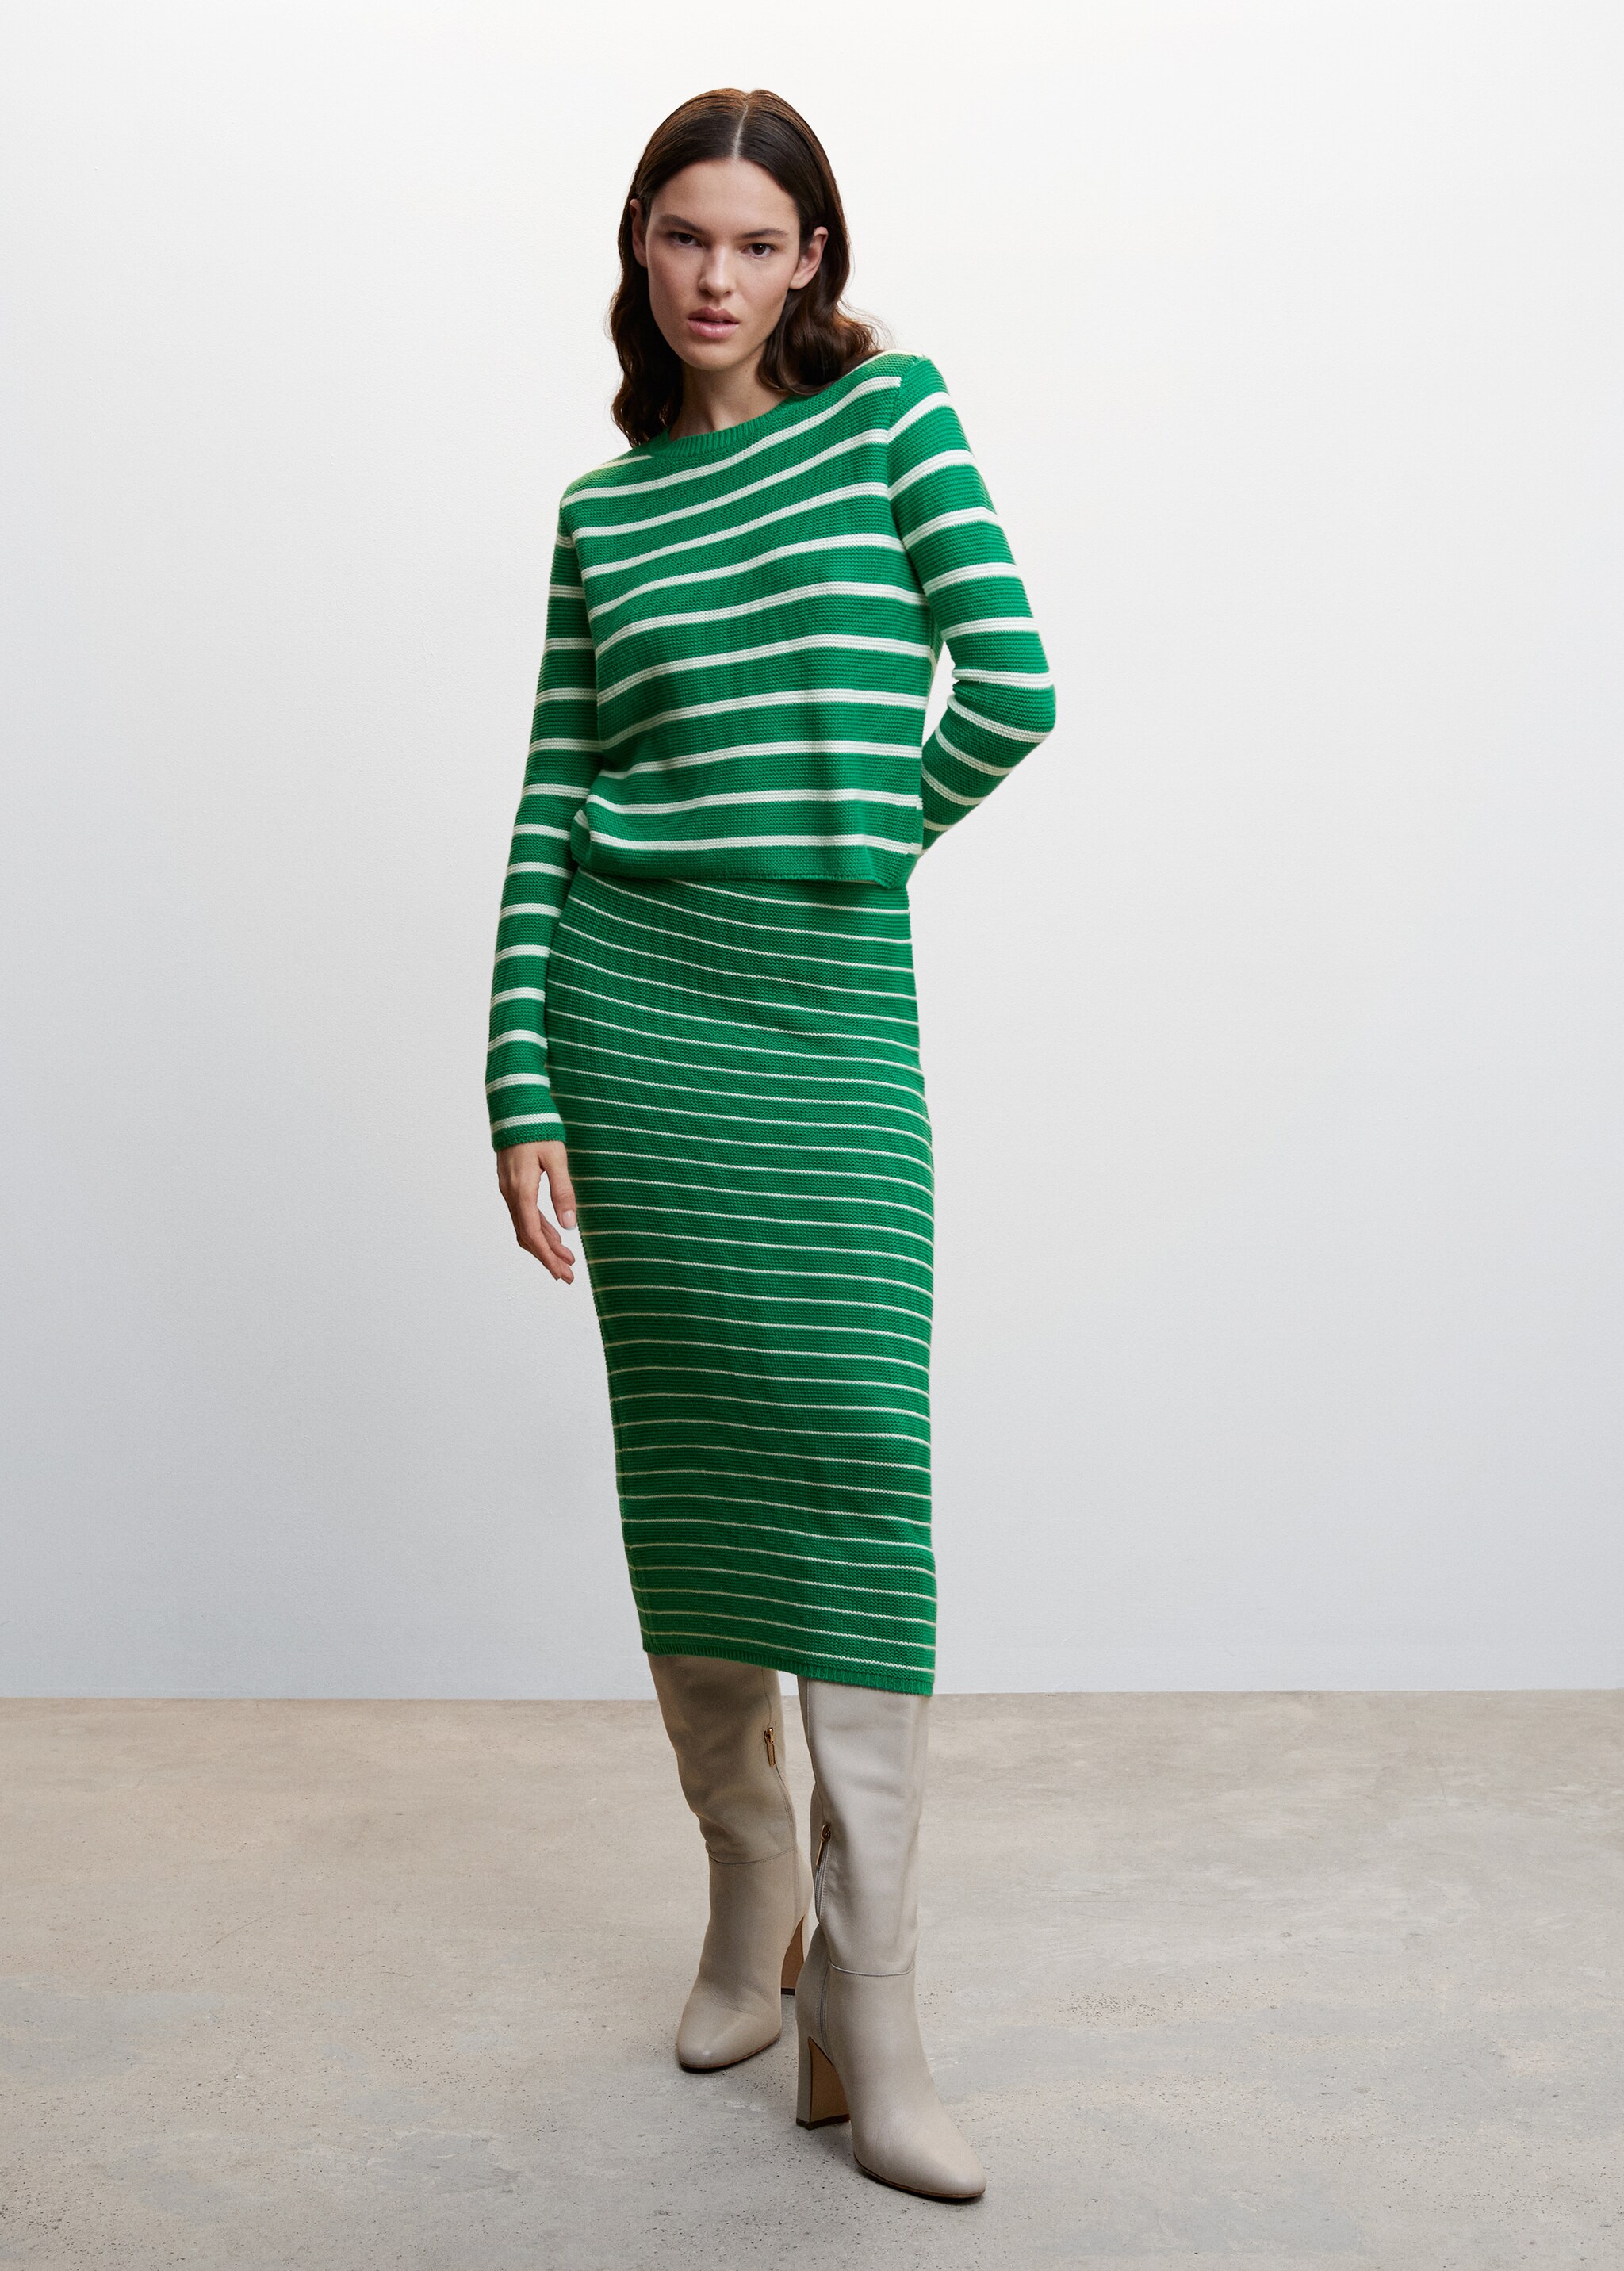 Striped knitted skirt - General plane